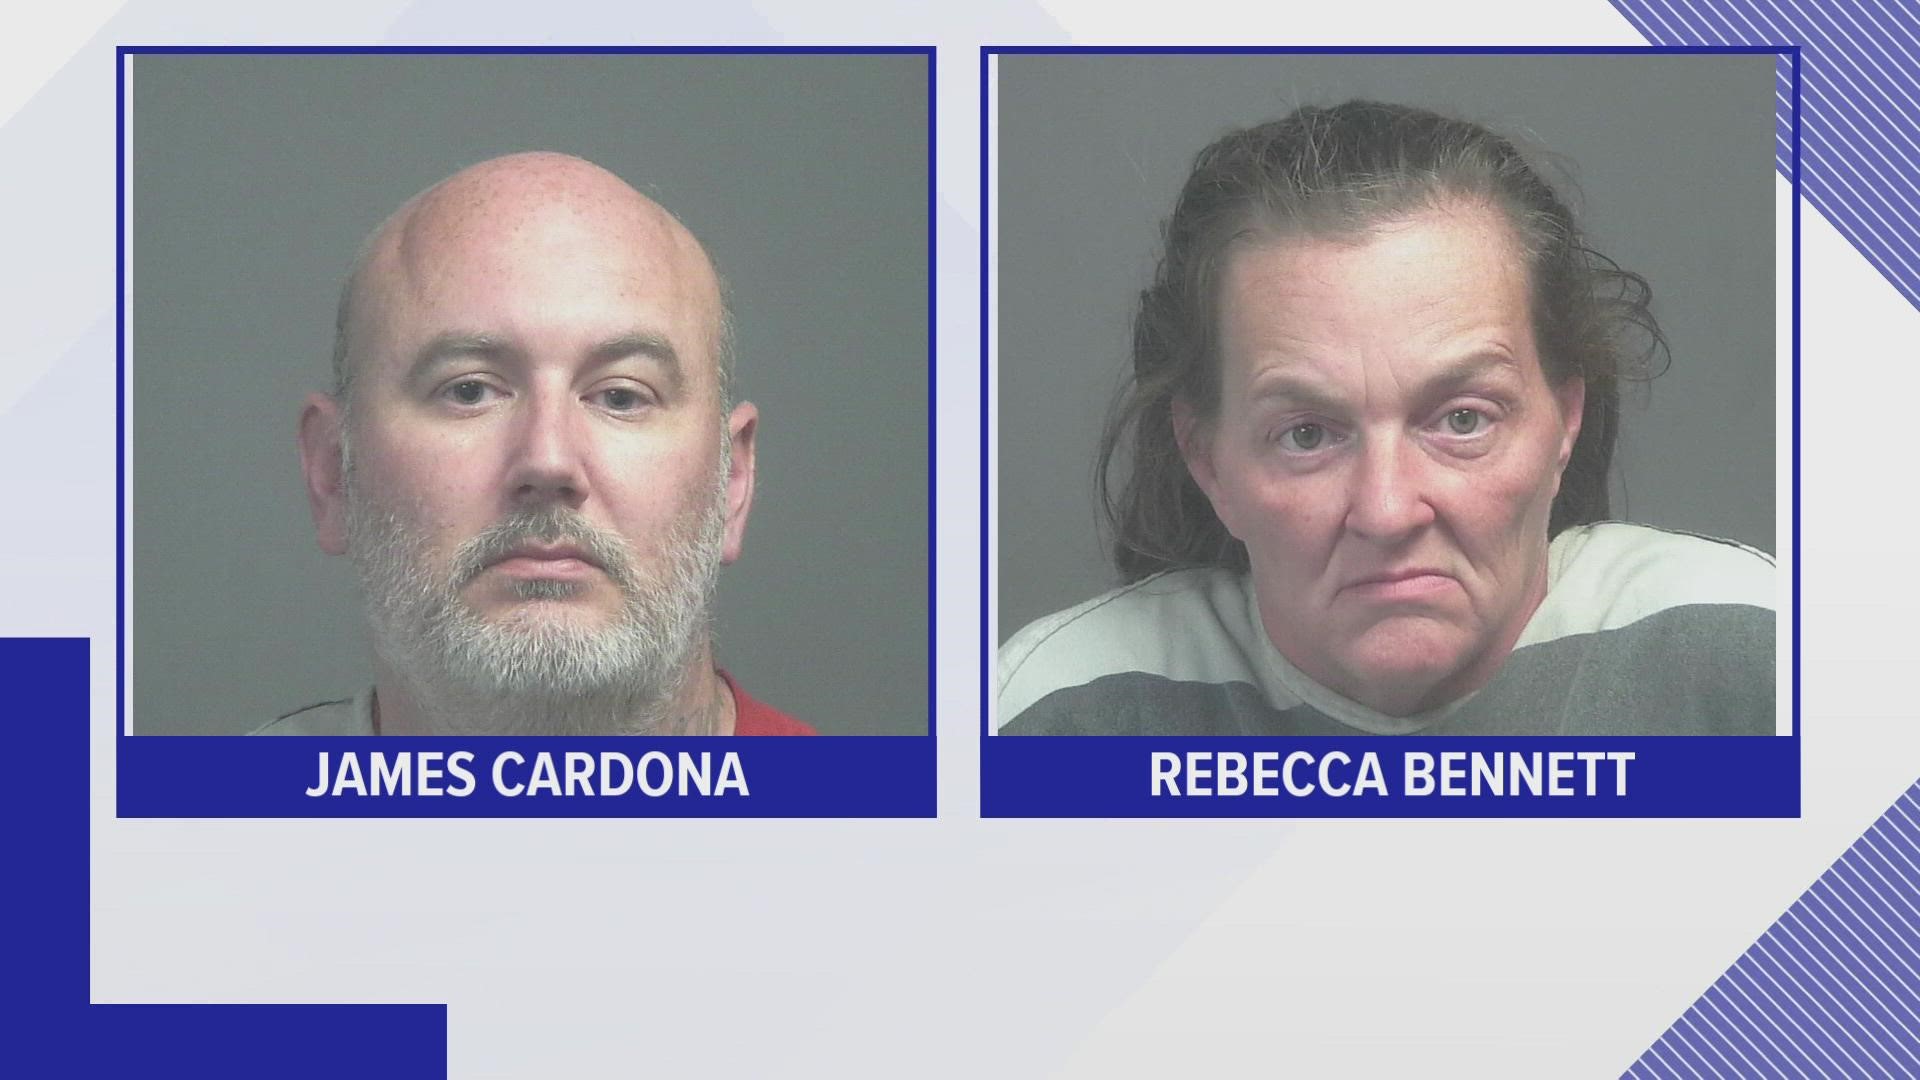 James Cardona, 43, and Rebecca Bennett, 47, were both charged with aggravated cruelty to animals and eight counts of cruelty to animals.